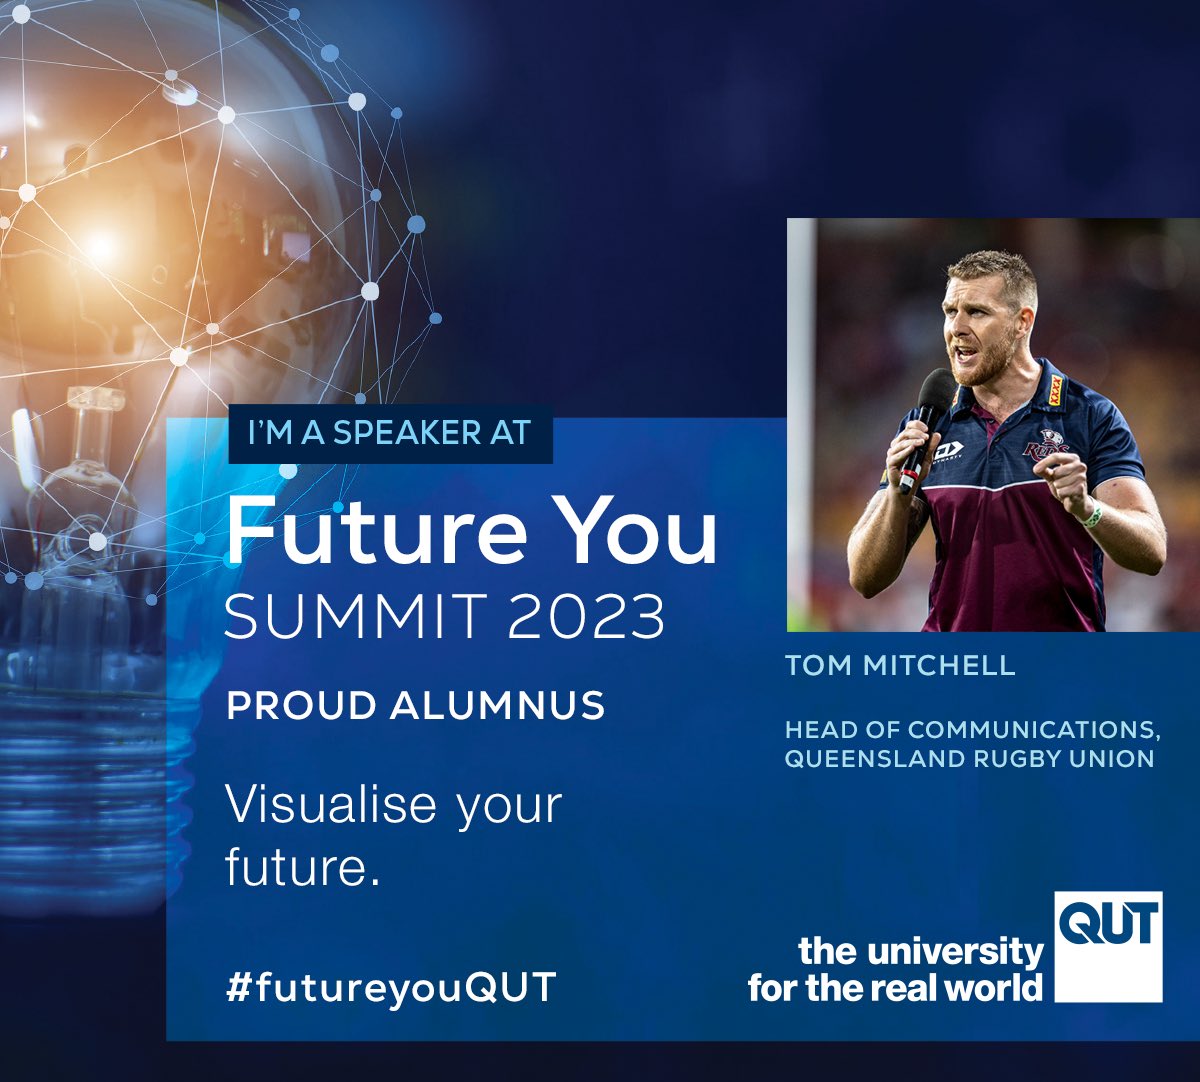 I’m looking forward to joining the @QUT Future You Summit next Wednesday to share how my time at QUT shaped my career journey and hopefully inspire the next generation of future leaders. #futureyouQUT #QUTAlumni @QUTJAMS @qutnews_alumni